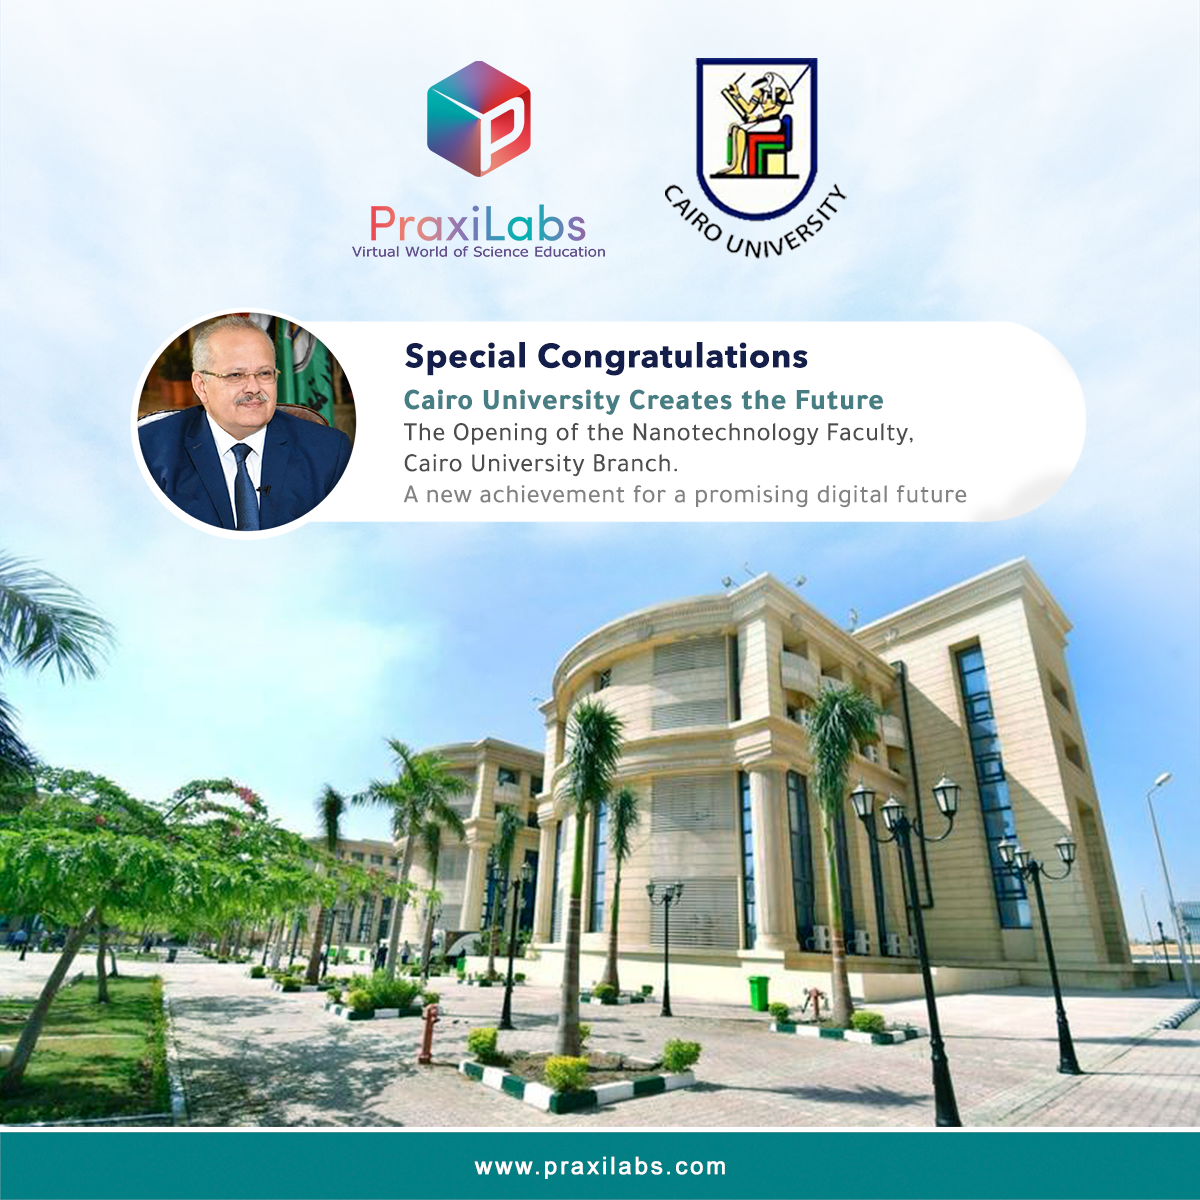 PraxiLabs expresses its sincere thanks to Cairo University 